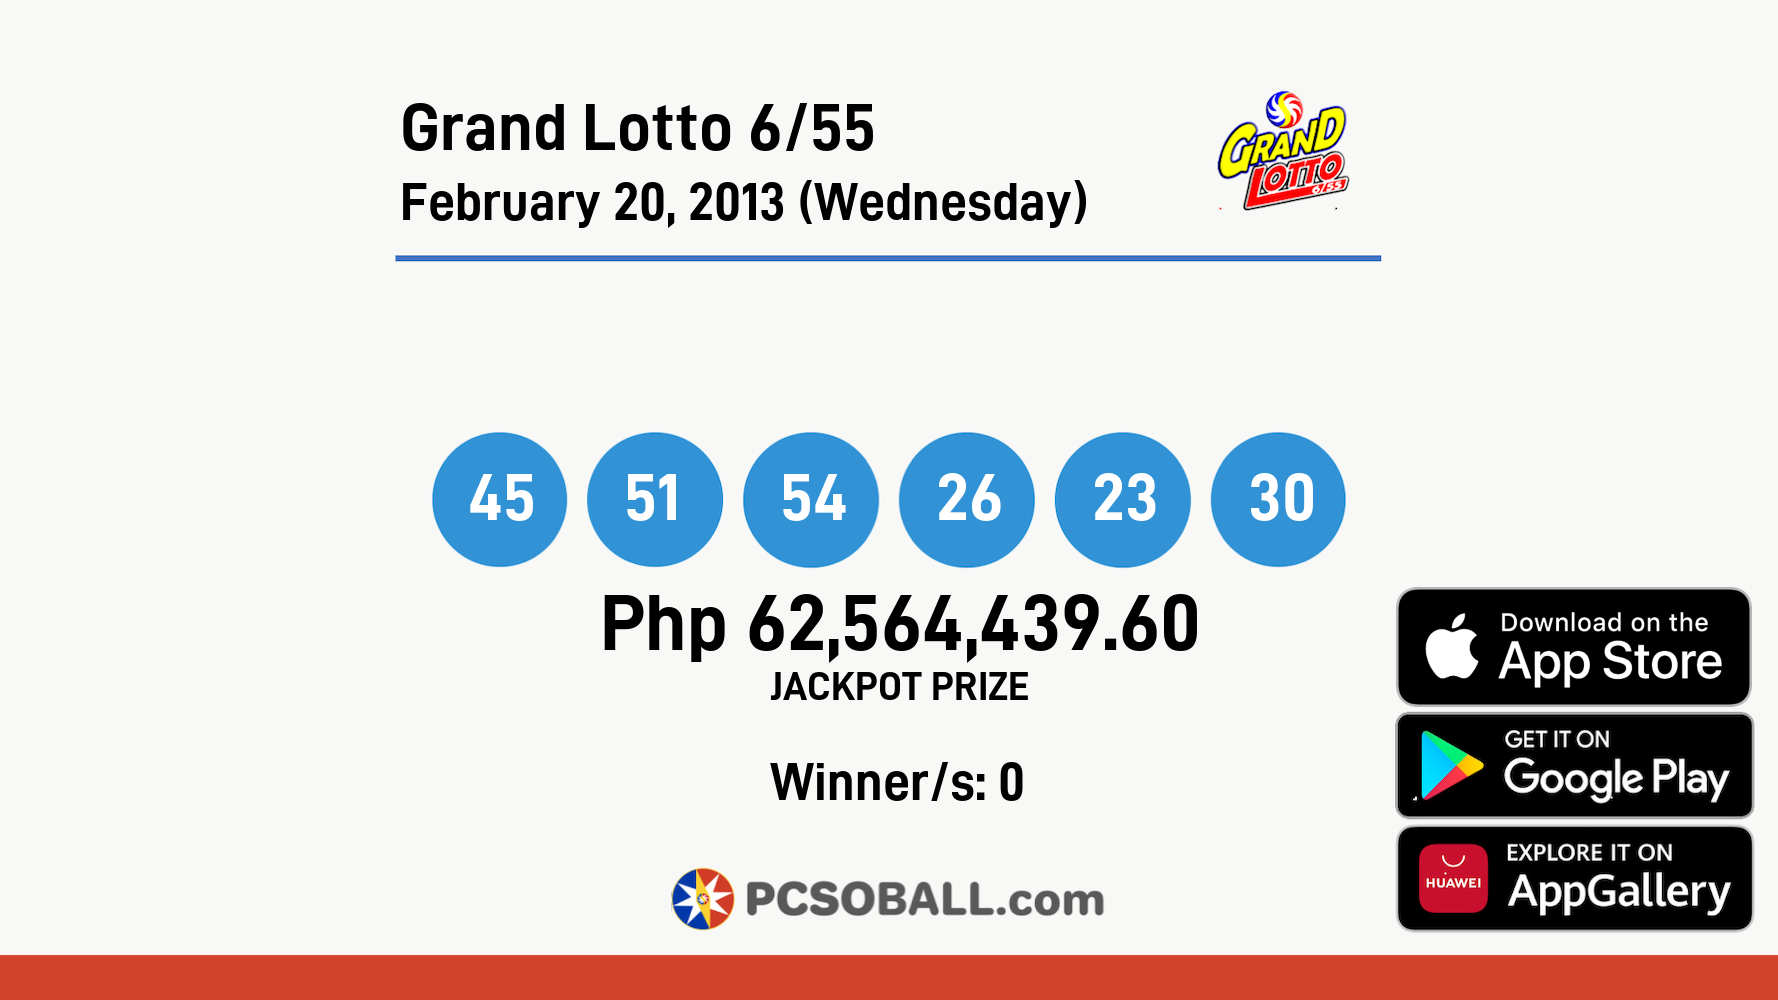 Grand Lotto 6/55 February 20, 2013 (Wednesday) Result